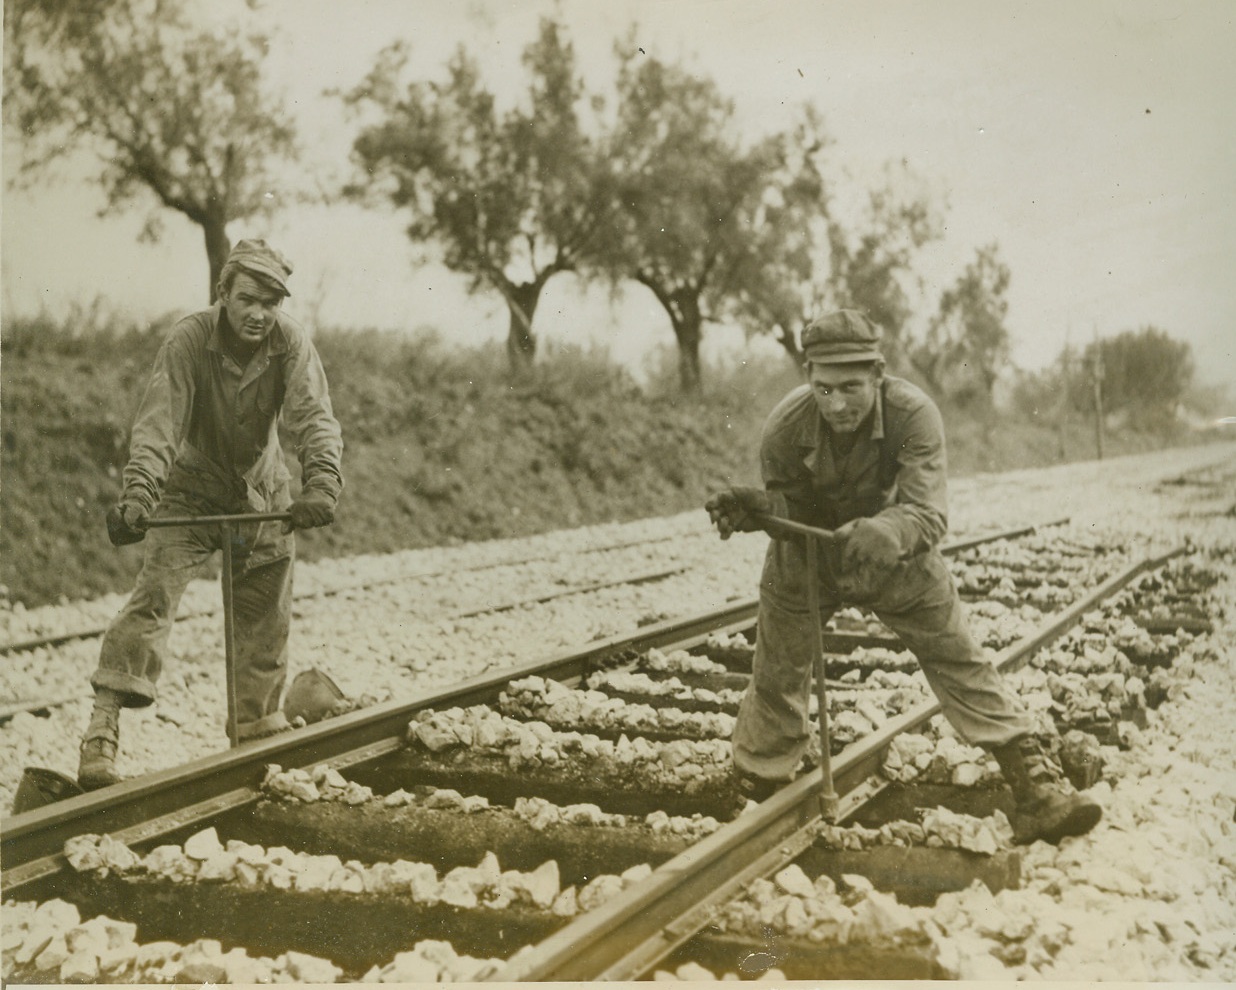 “I’m Working on the Railroad”, 2/9/1944. SOUTHERN ITALY – Corp. Tech. Robert B. Force, of Springfield, Ill., left, and Sergt. Tech. Fritz Herzog, of Shidmon, Tex., repair the damage done to Italian railroads by the retreating Germans, and by Allied shelling and bombing before the area was captured.Credit (ACME);